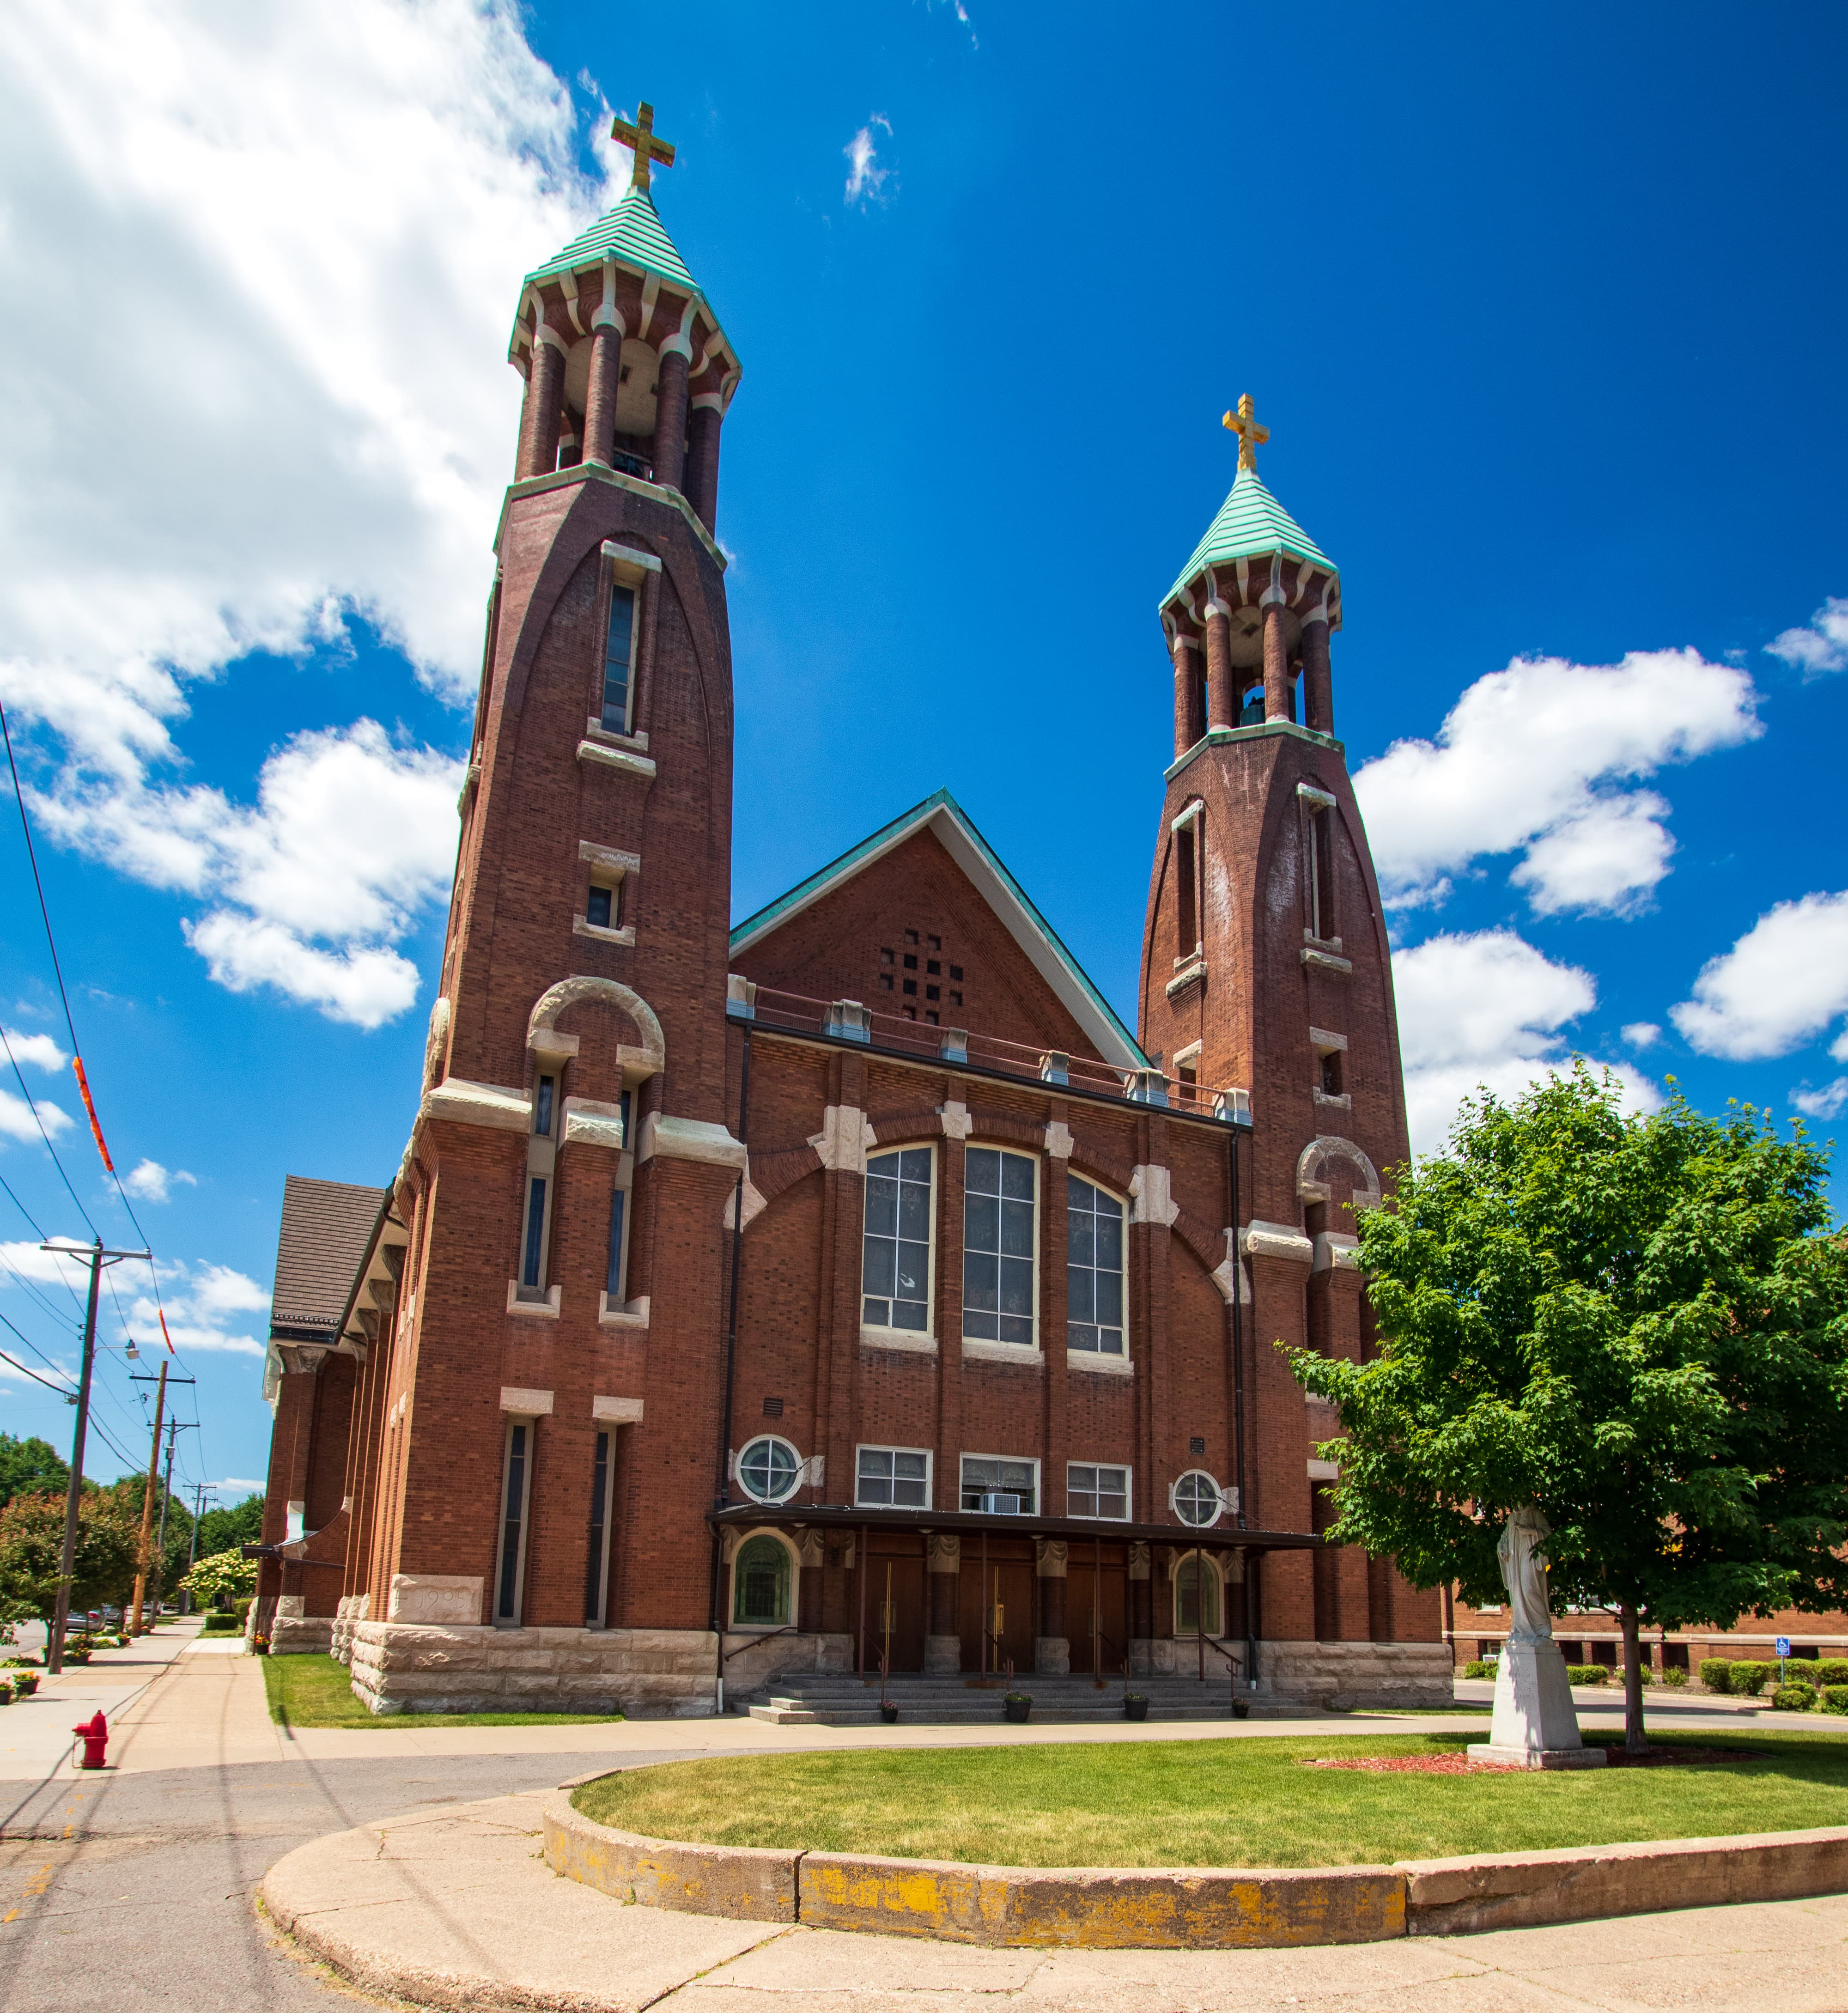 St. Bernard’s Catholic Church is a North End institution. Founded in 1890 to serve the primarily German congregation, the current building was constructed in 1906.